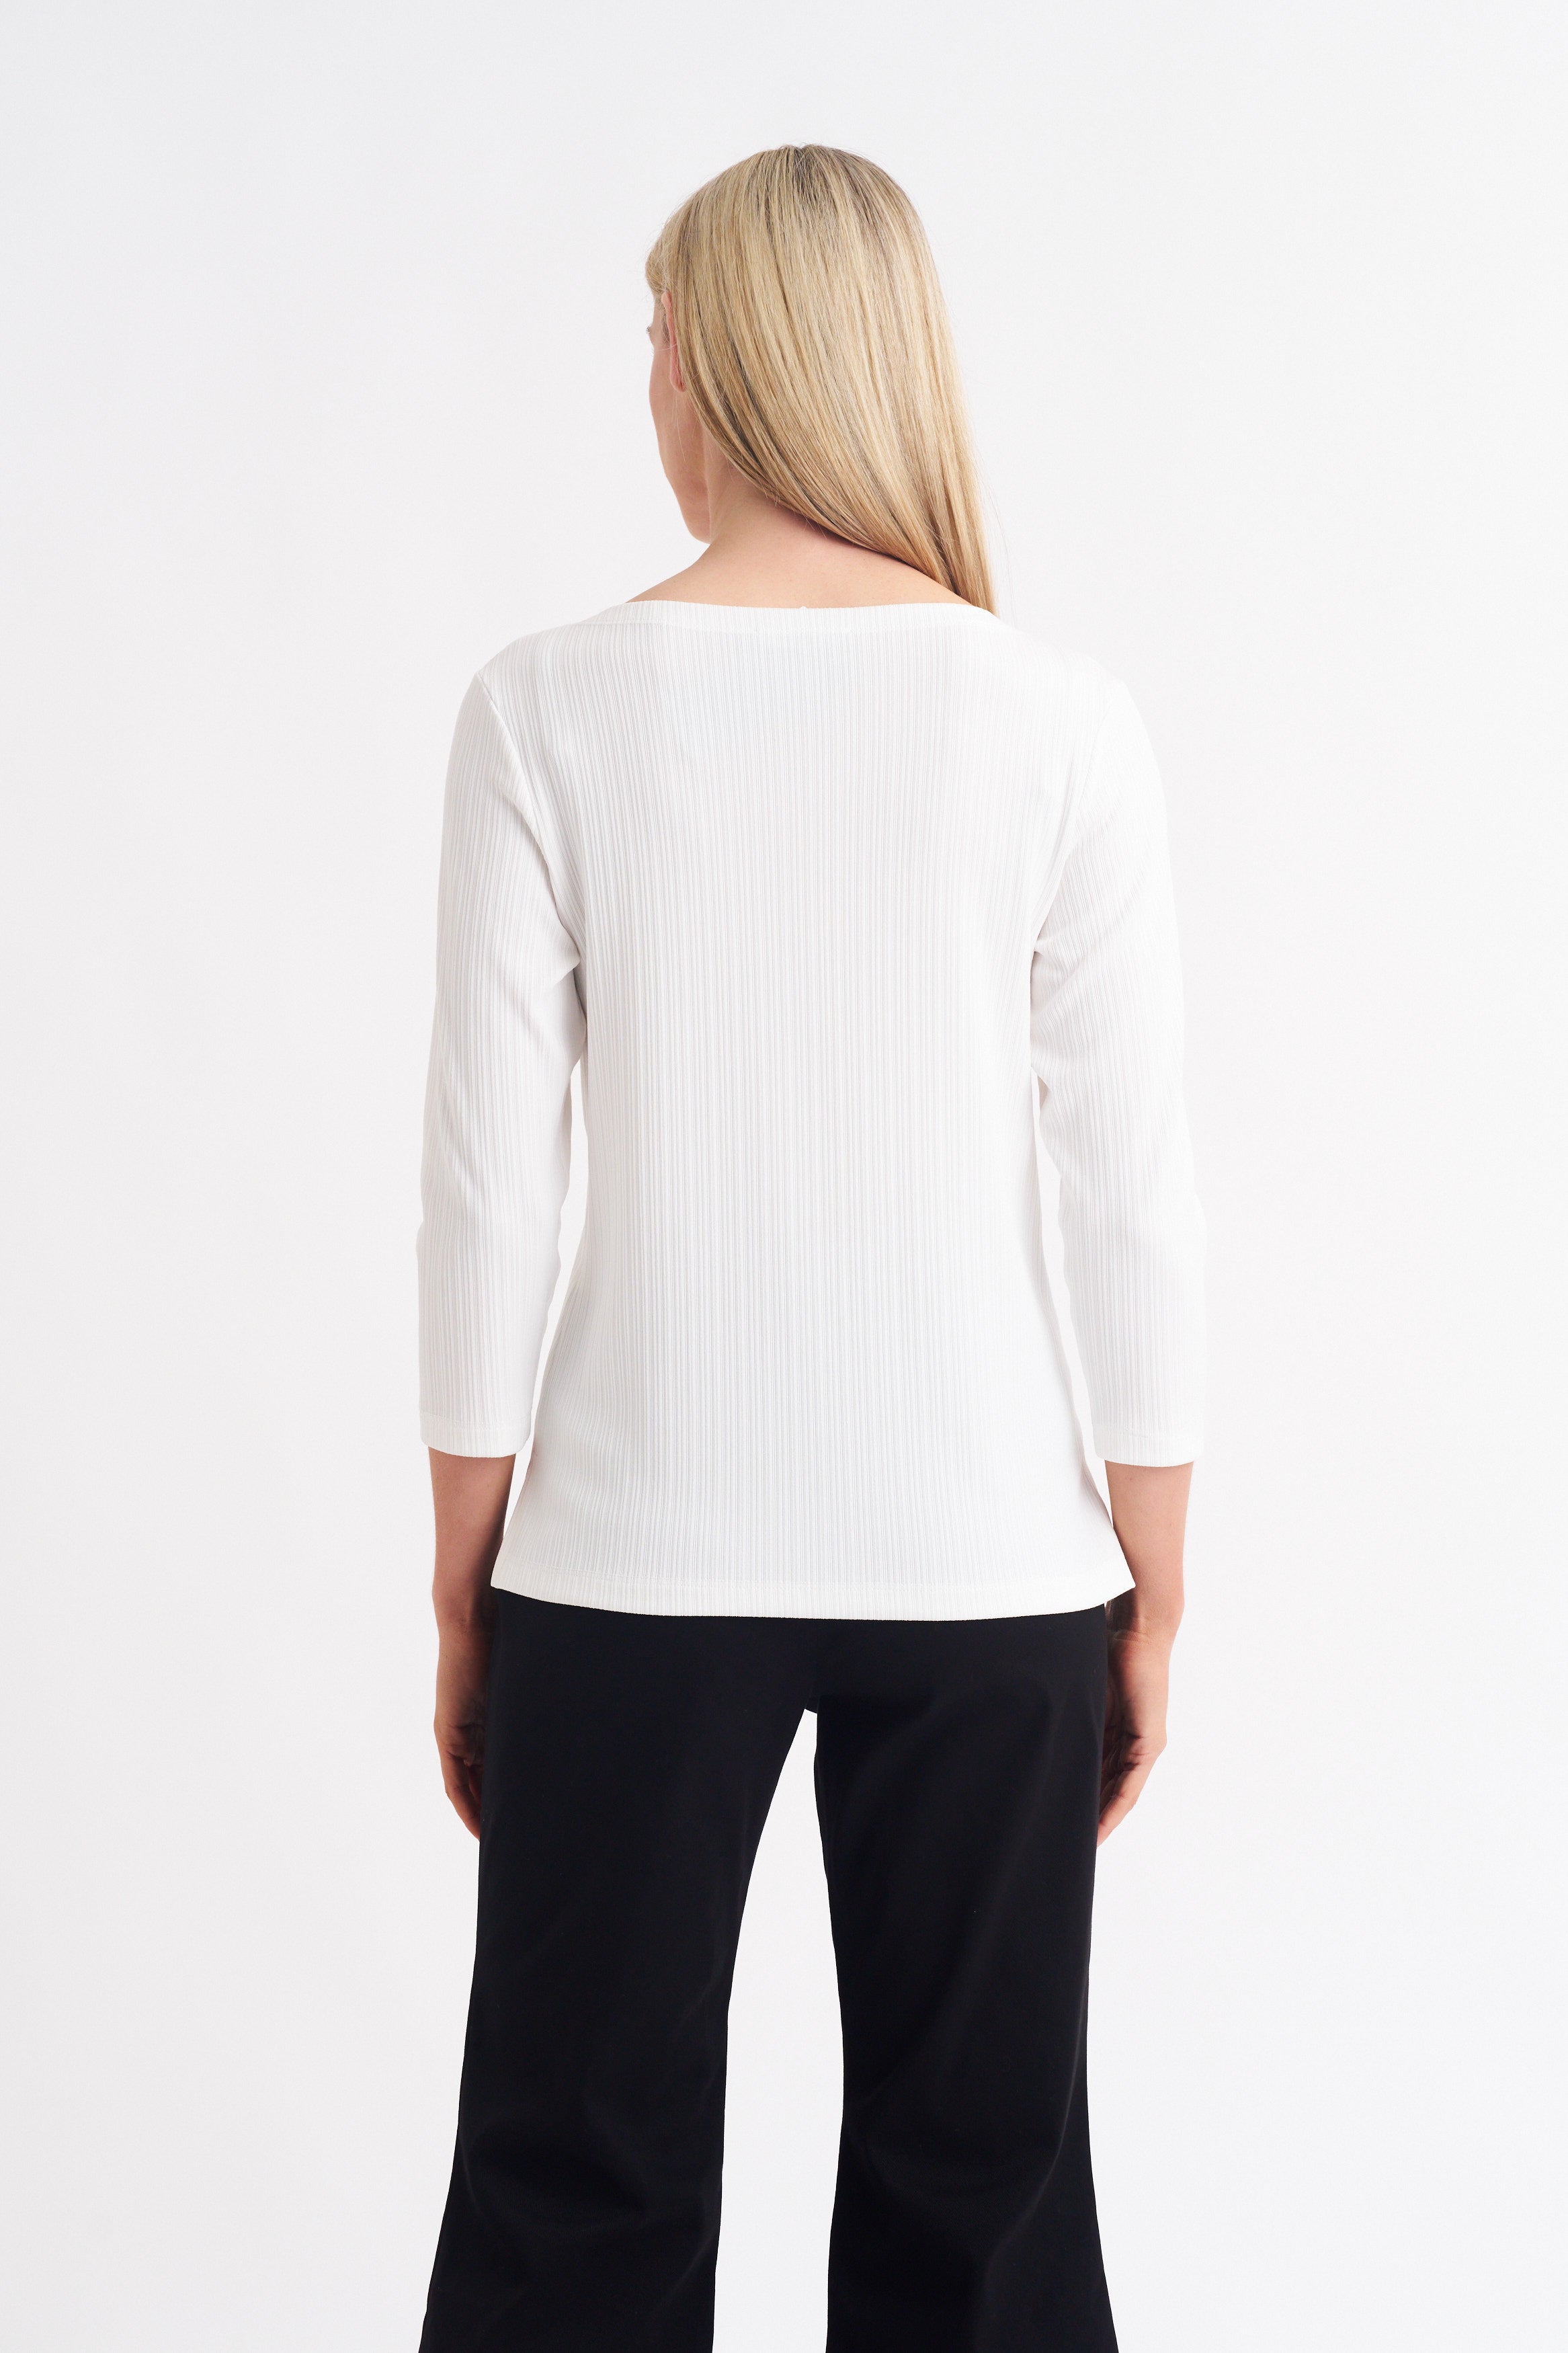 LUXE FRENCH BOATNECK